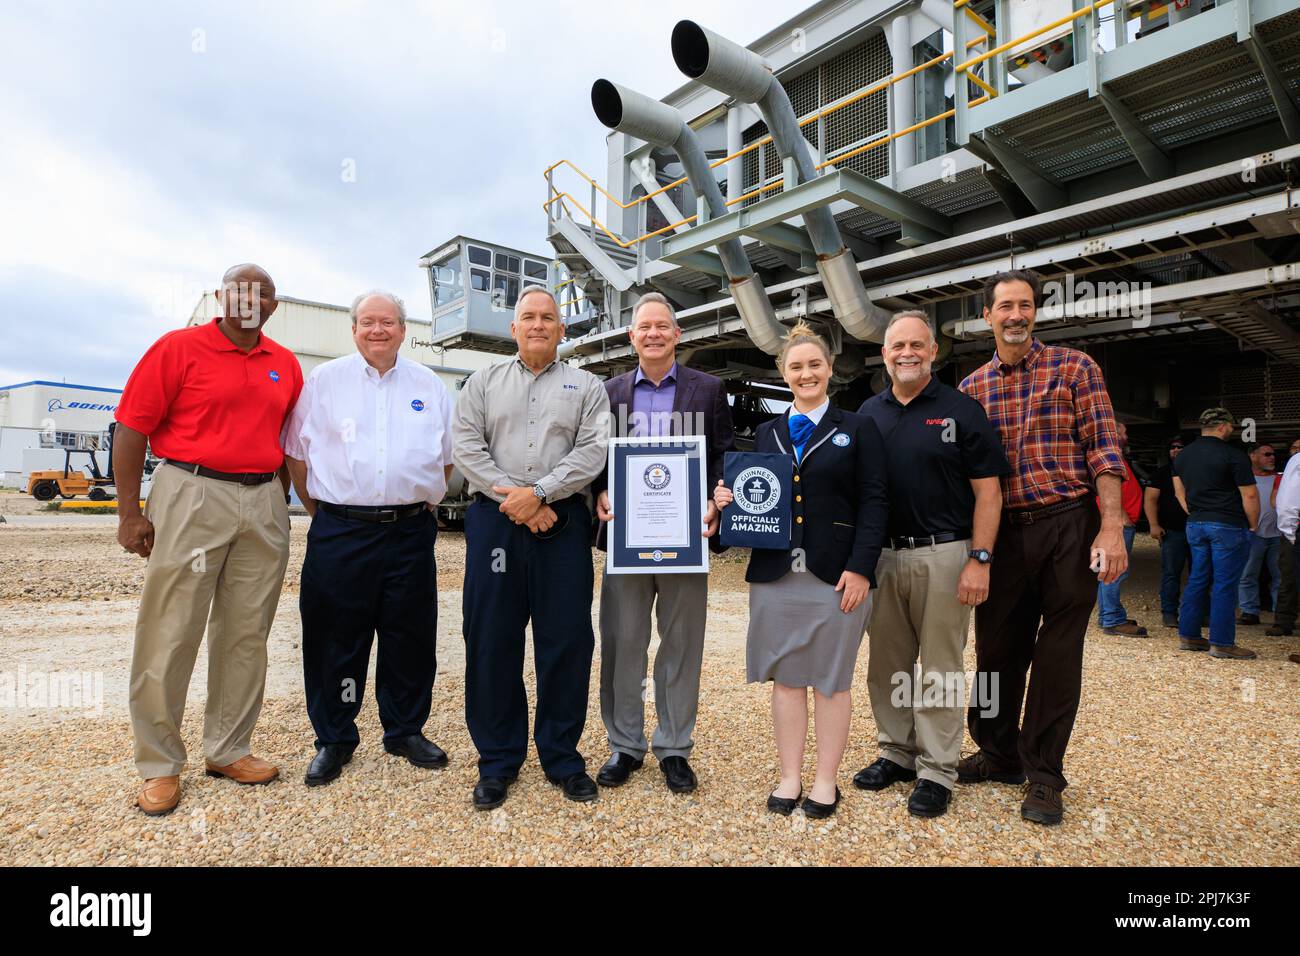 KSC, Florida, USA. 29th Mar, 2023. Guinness World Records officially designated NASA's Crawler Transporter 2 as the heaviest self-powered vehicle, weighing approximately 6.65 million pounds. During a March 29, 2023, ceremony at the agency's Kennedy Space Center in Florida, Guinness World Records presented a certificate to teams with the Exploration Ground Systems Program and Kennedy leadership. Pictured, from left, are: Kelvin Manning, Kennedy deputy director; Burt Summerfield, Kennedy associate director, management; Brett Raulerson, Jacobs TOSC Crawlers, Transporters and Structures group ma Stock Photo